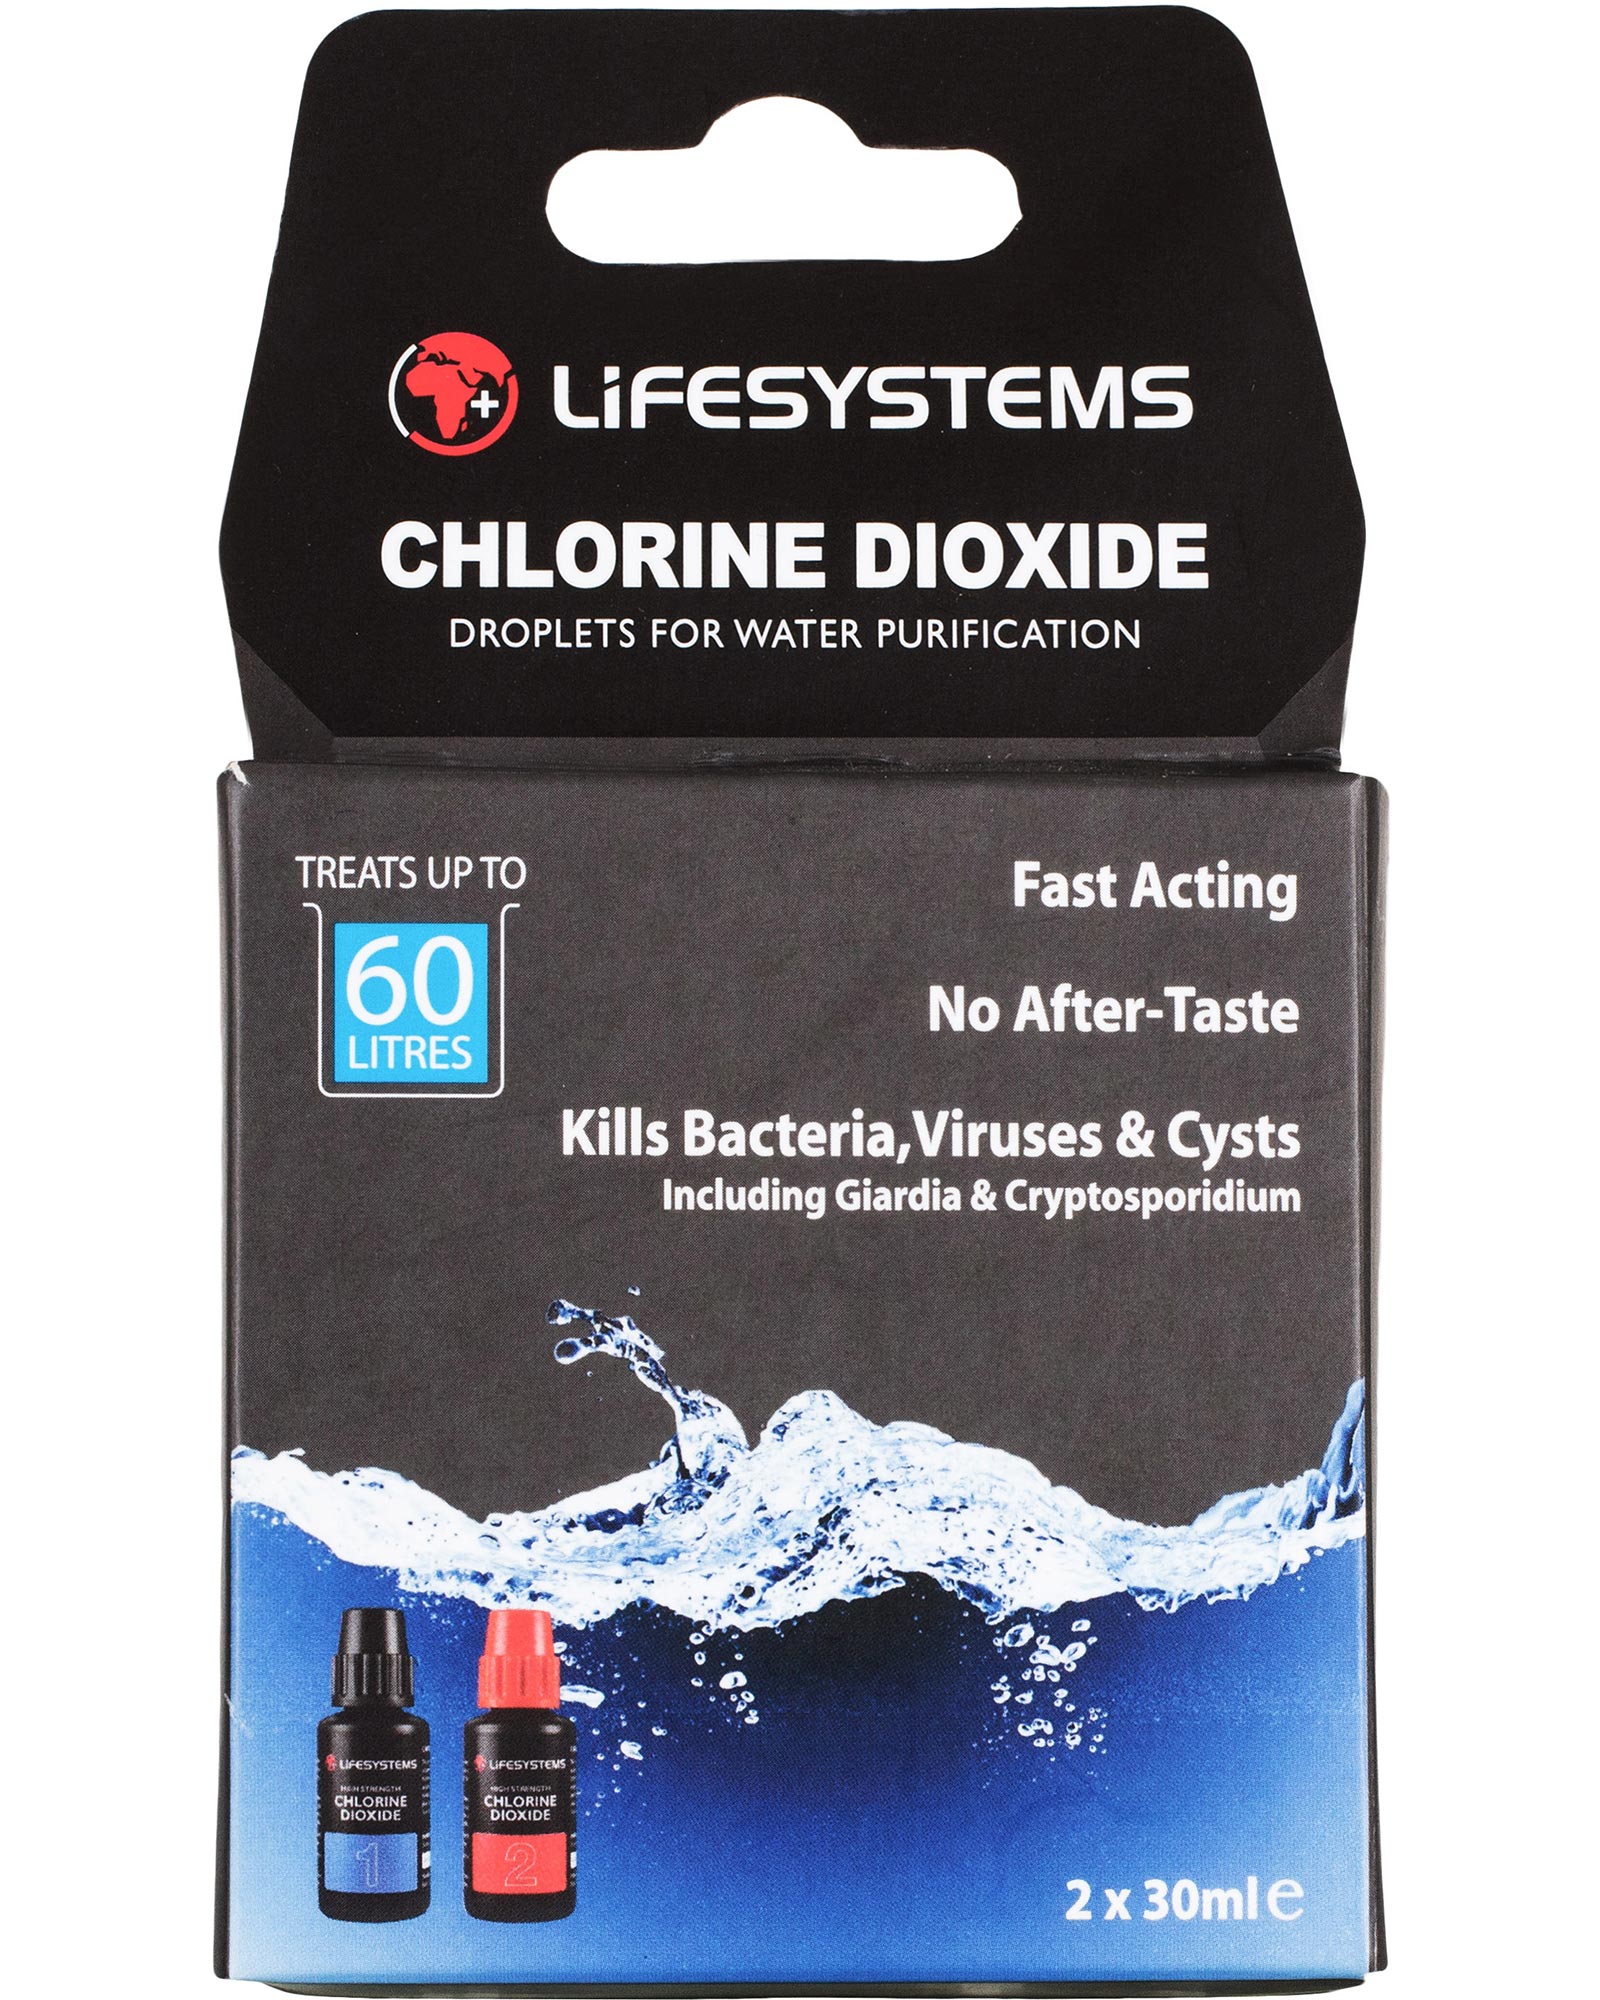 Lifesystems Chlorine Dioxide Water Treatment Droplets